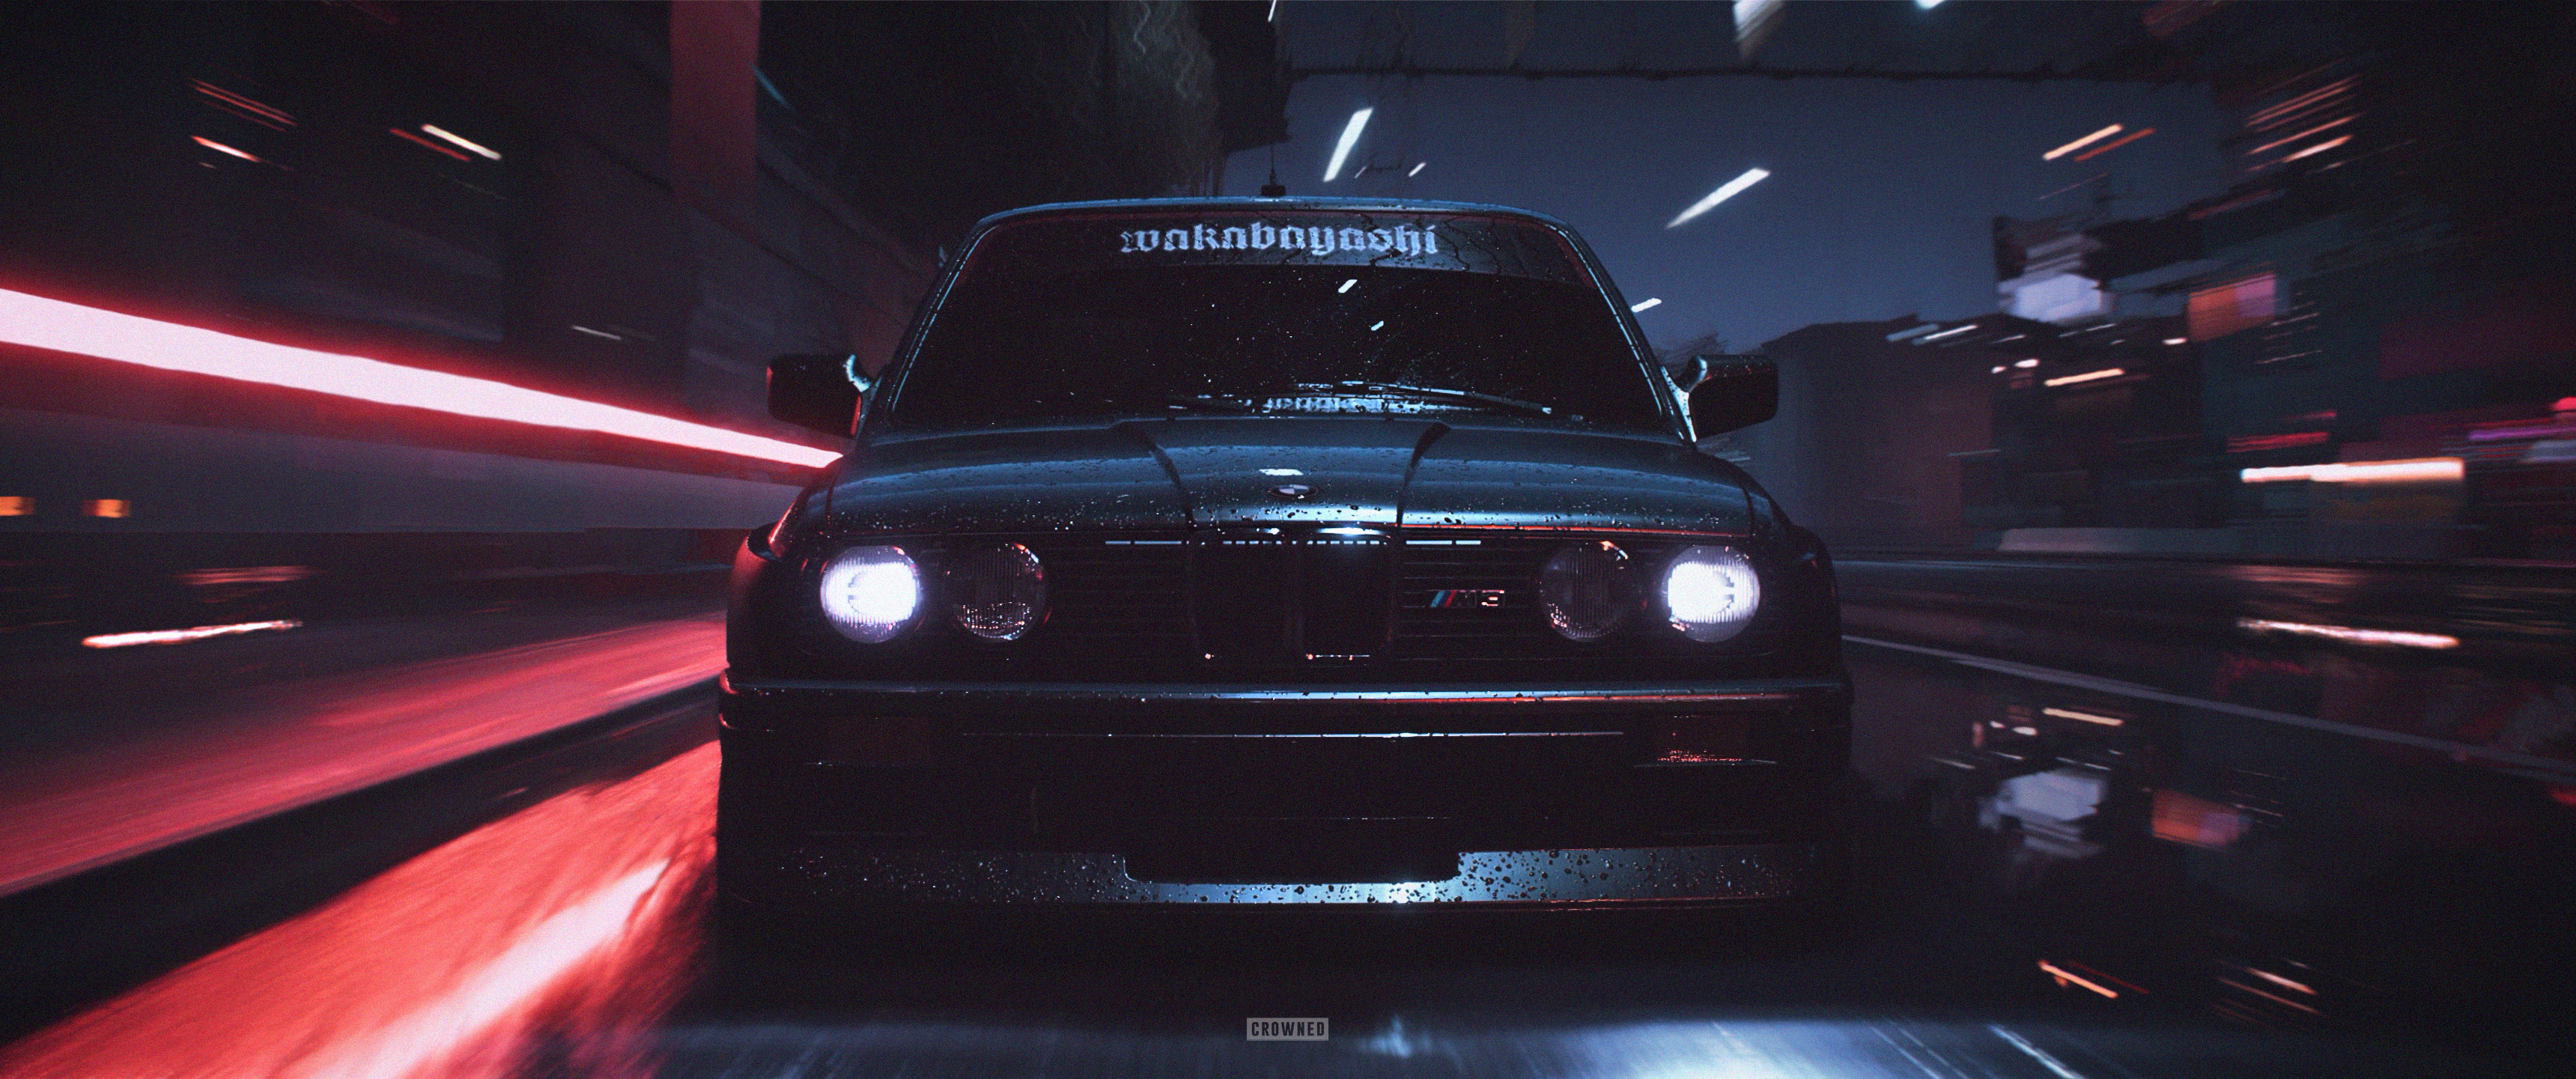 Need For Speed Payback E30 HD Wallpaper Background